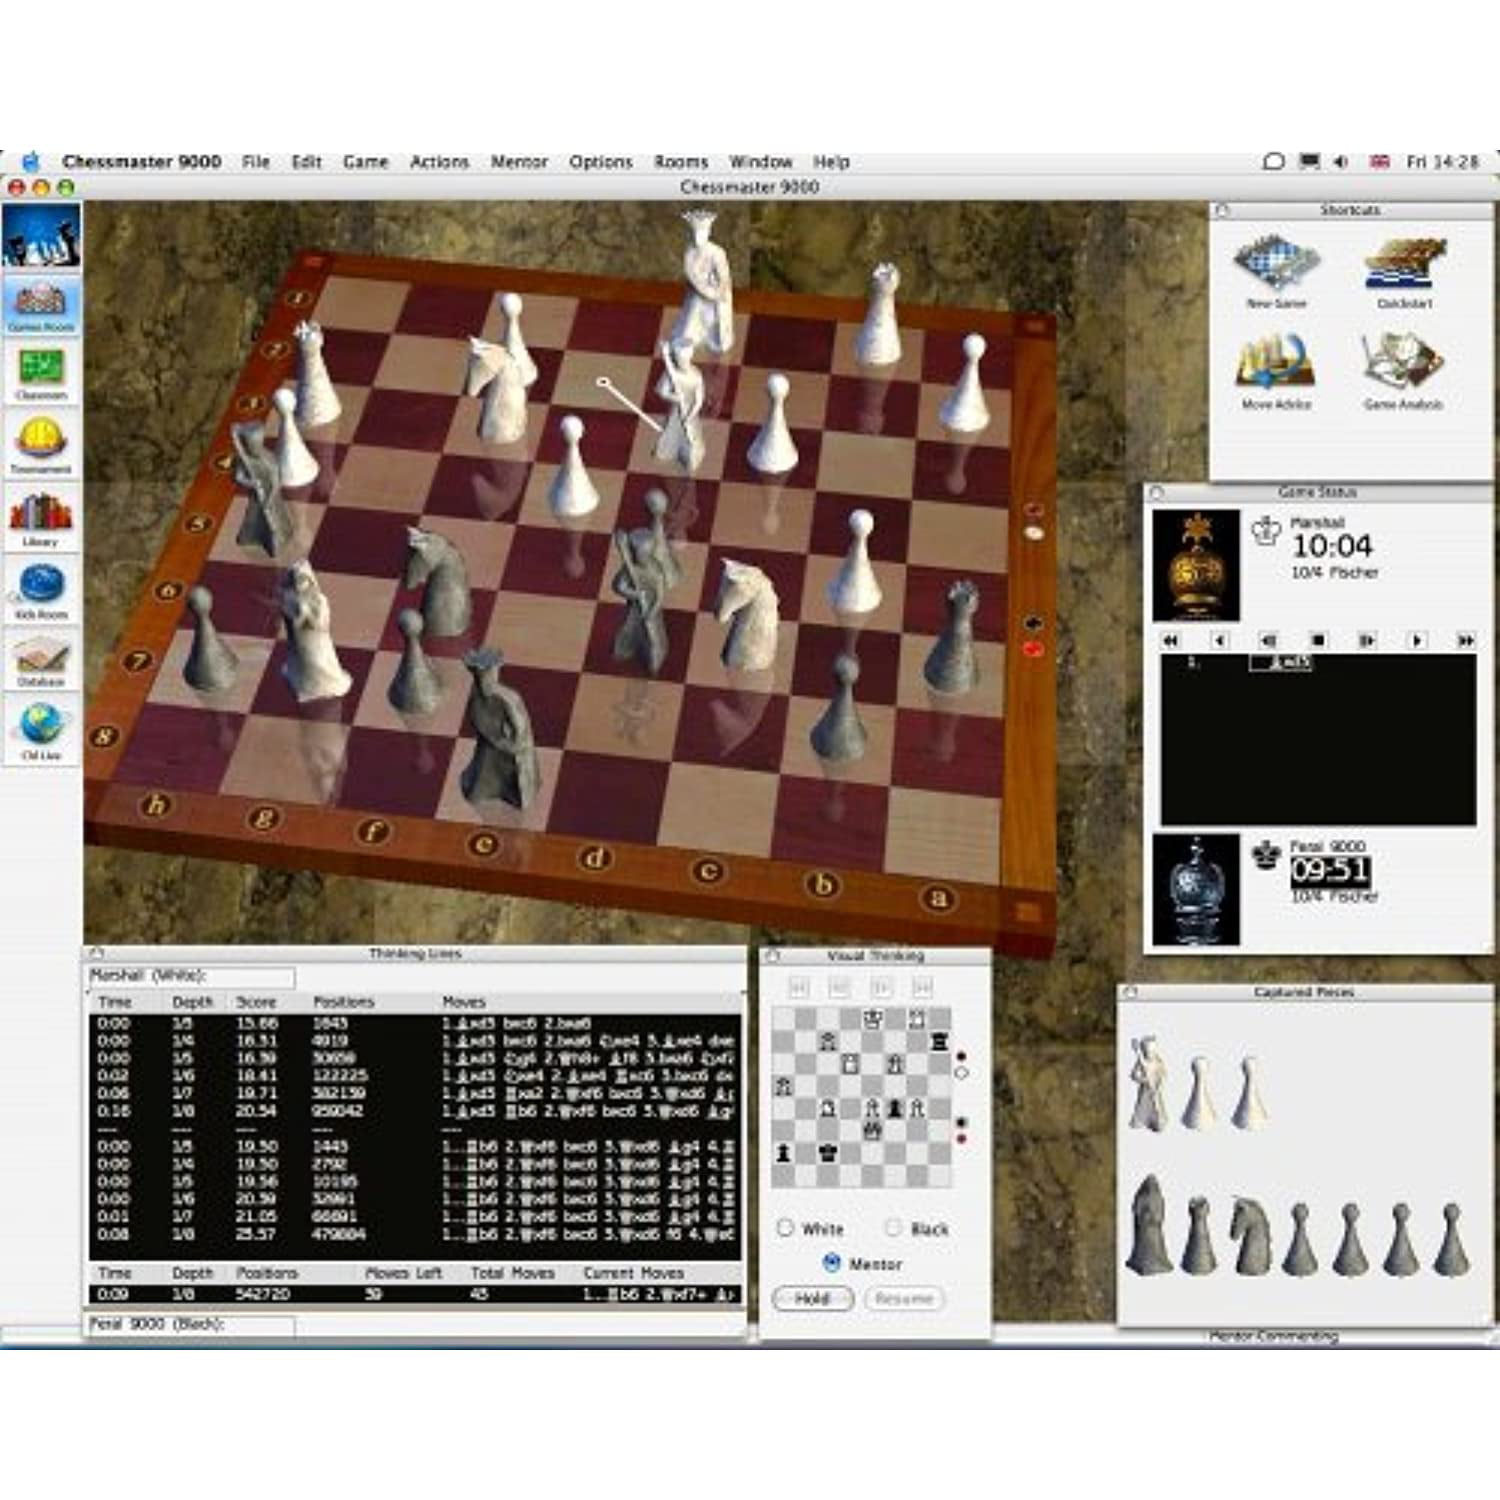 Chessmaster 9000 DRM-Free Download - Free GOG PC Games